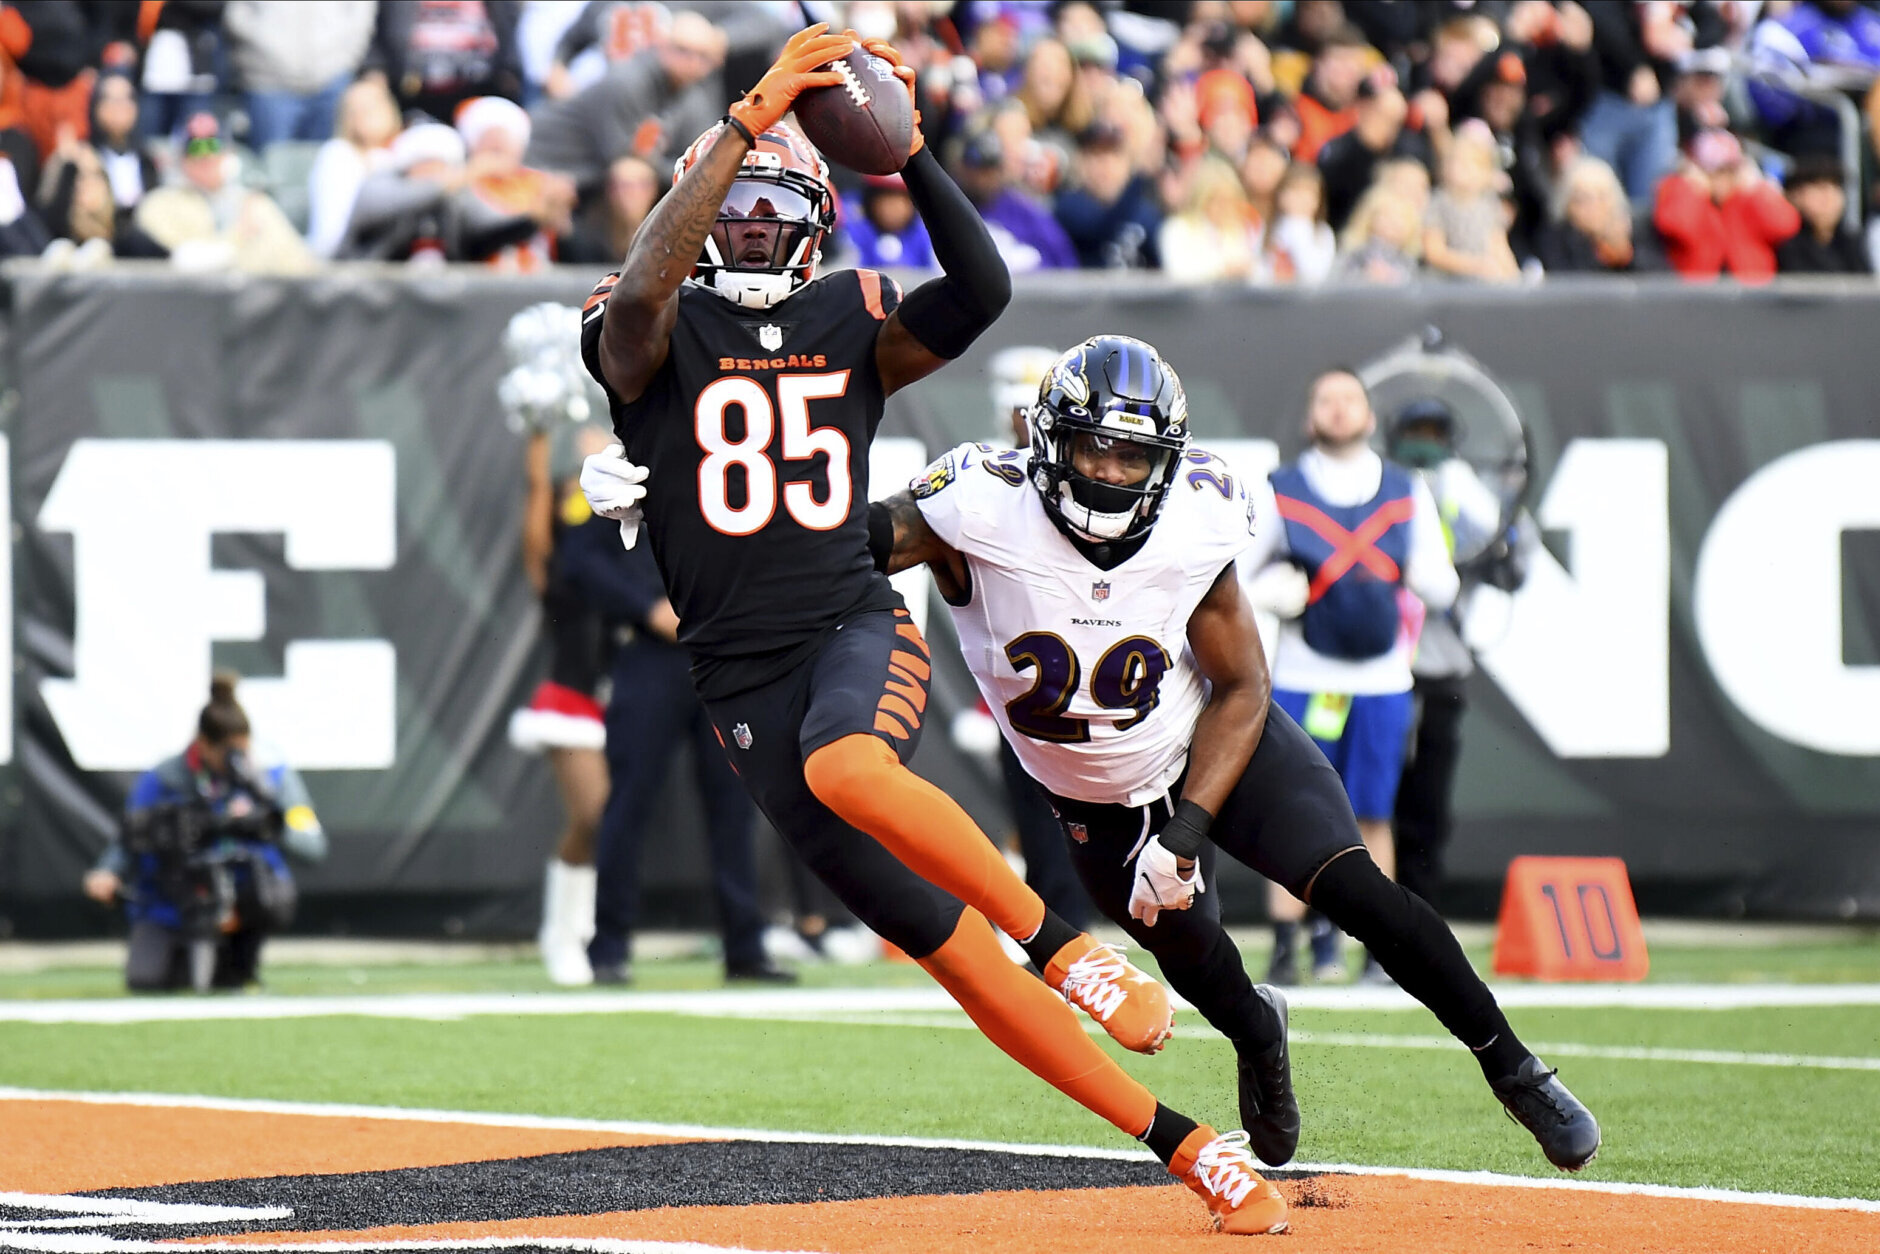 <p><em><strong>Ravens 21</strong></em><br />
<em><strong>Bengals 41</strong></em></p>
<p>I don&#8217;t know if it was <a href="https://www.espn.com/nfl/story/_/id/32924799/joe-burrow-believes-low-covid-19-totals-cincinnati-bengals-partly-due-city-lack-nightlife" target="_blank" rel="noopener">Joe Burrow&#8217;s boredom in Cincinnati</a> or Baltimore&#8217;s injury-riddled secondary, but the Bengals took out years of frustration on the Ravens.</p>
<p>Burrow&#8217;s franchise-record 525 yards were the fourth-most in NFL history and his four touchdowns moved Cincy into sole possession of first place in the AFC North. Given they swept the Ravens and Steelers (in the same season for the first time since 2009) by a combined score of 147-58, the Bengals have earned the division title they&#8217;re about to win tenfold.</p>
<p>Meanwhile, Baltimore&#8217;s four-game slide moves them from the 1-seed in the AFC to seventh in the conference in just a month&#8217;s time. I hate that Josh Johnson&#8217;s return was spoiled by that patchwork Ravens defense, but I root hard for a 35-year-old journeyman on his 17th team across three leagues.</p>
